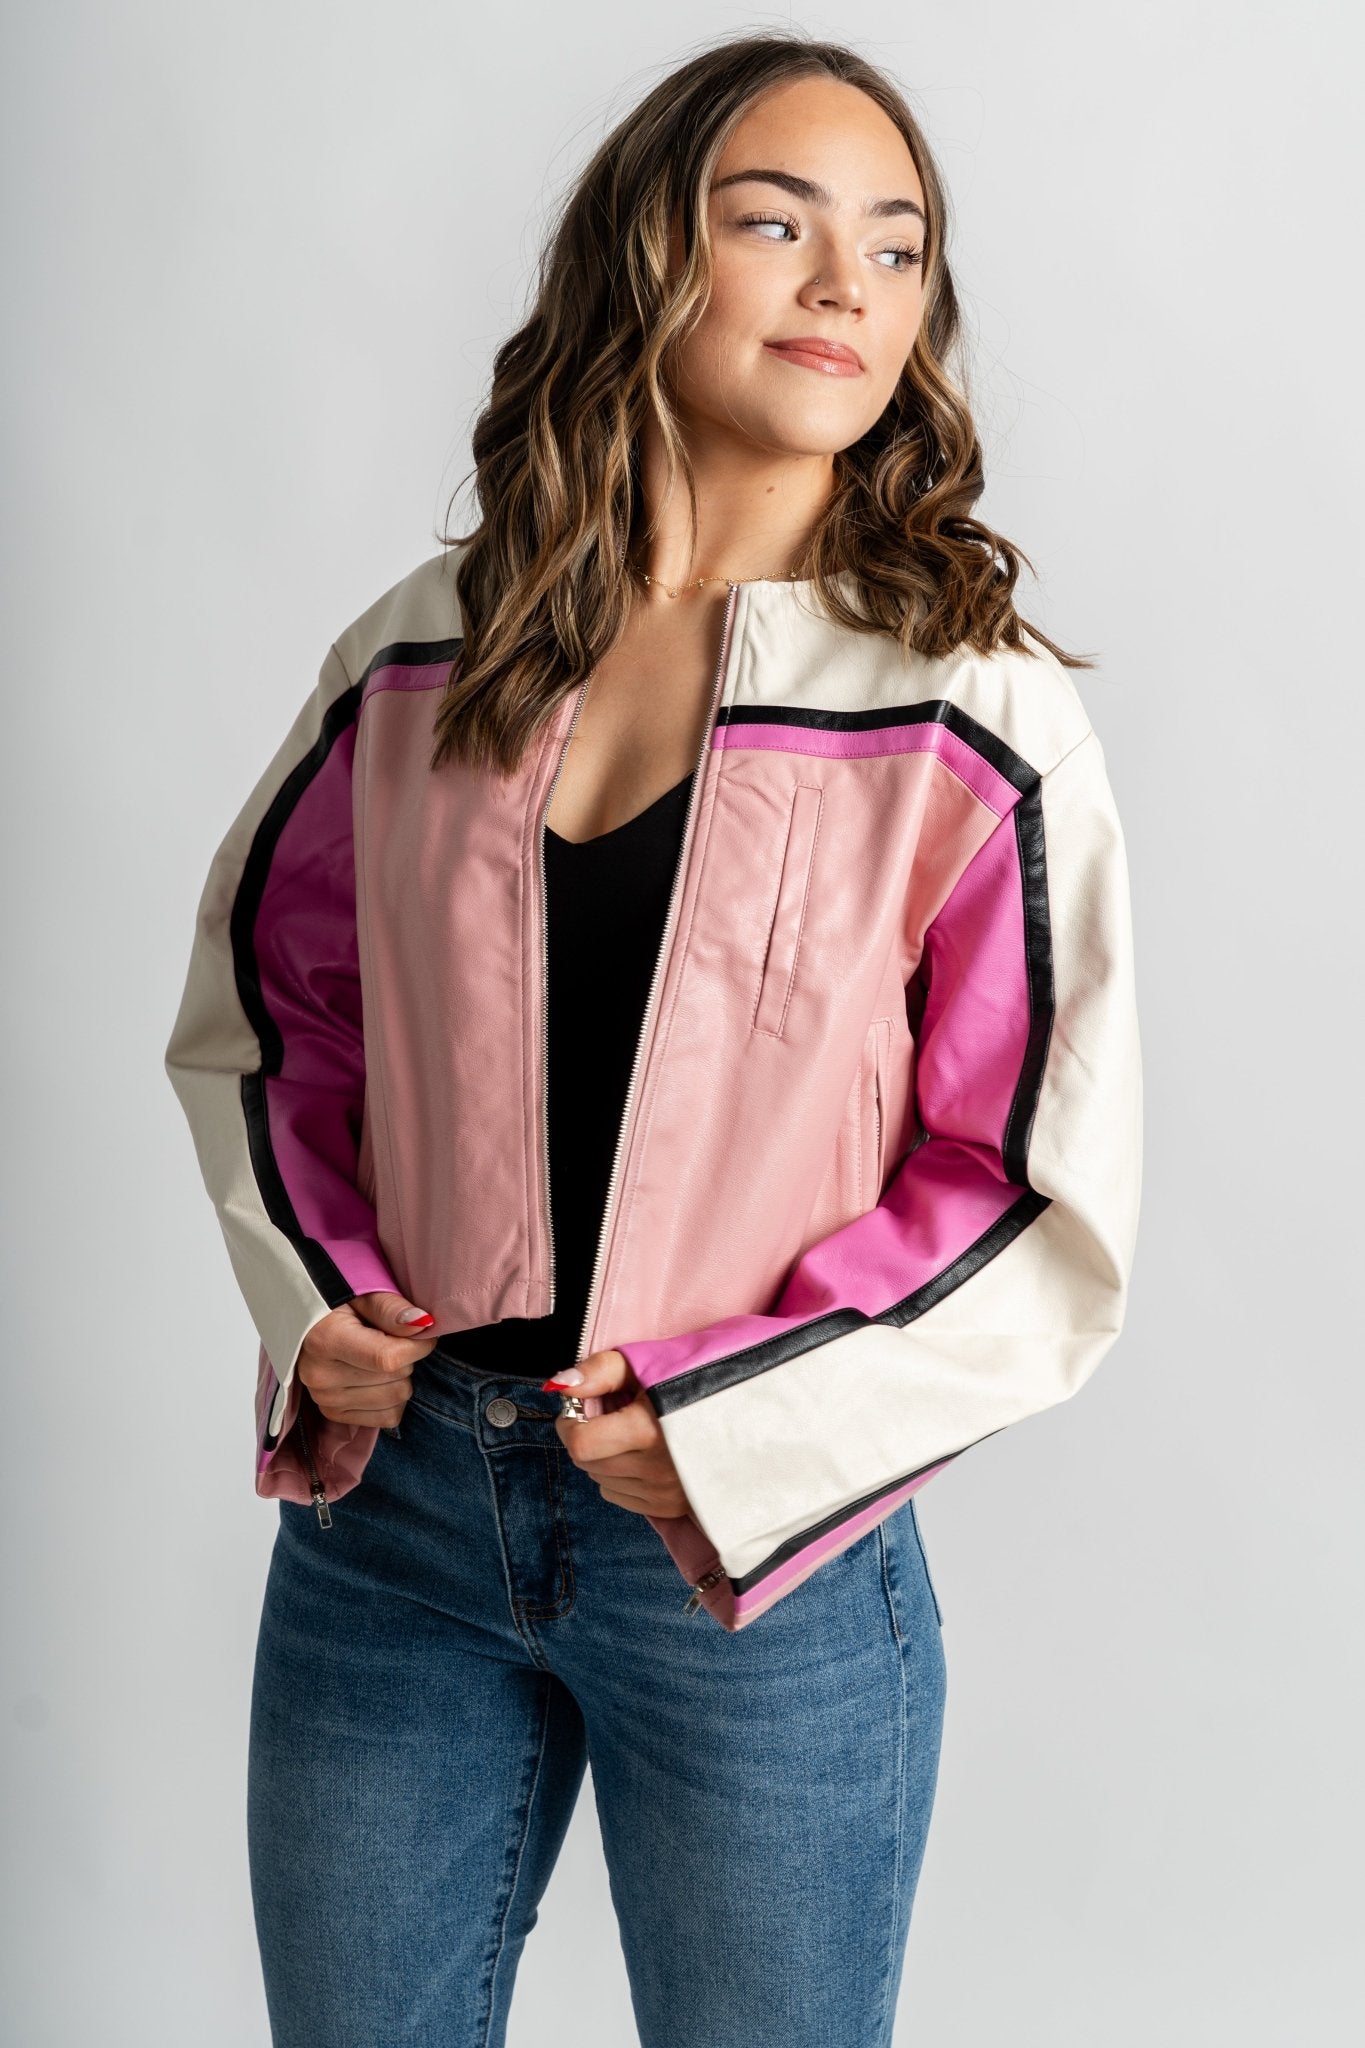 Barcelona faux leather moto jacket pink – Unique Blazers | Cute Blazers For Women at Lush Fashion Lounge Boutique in Oklahoma City